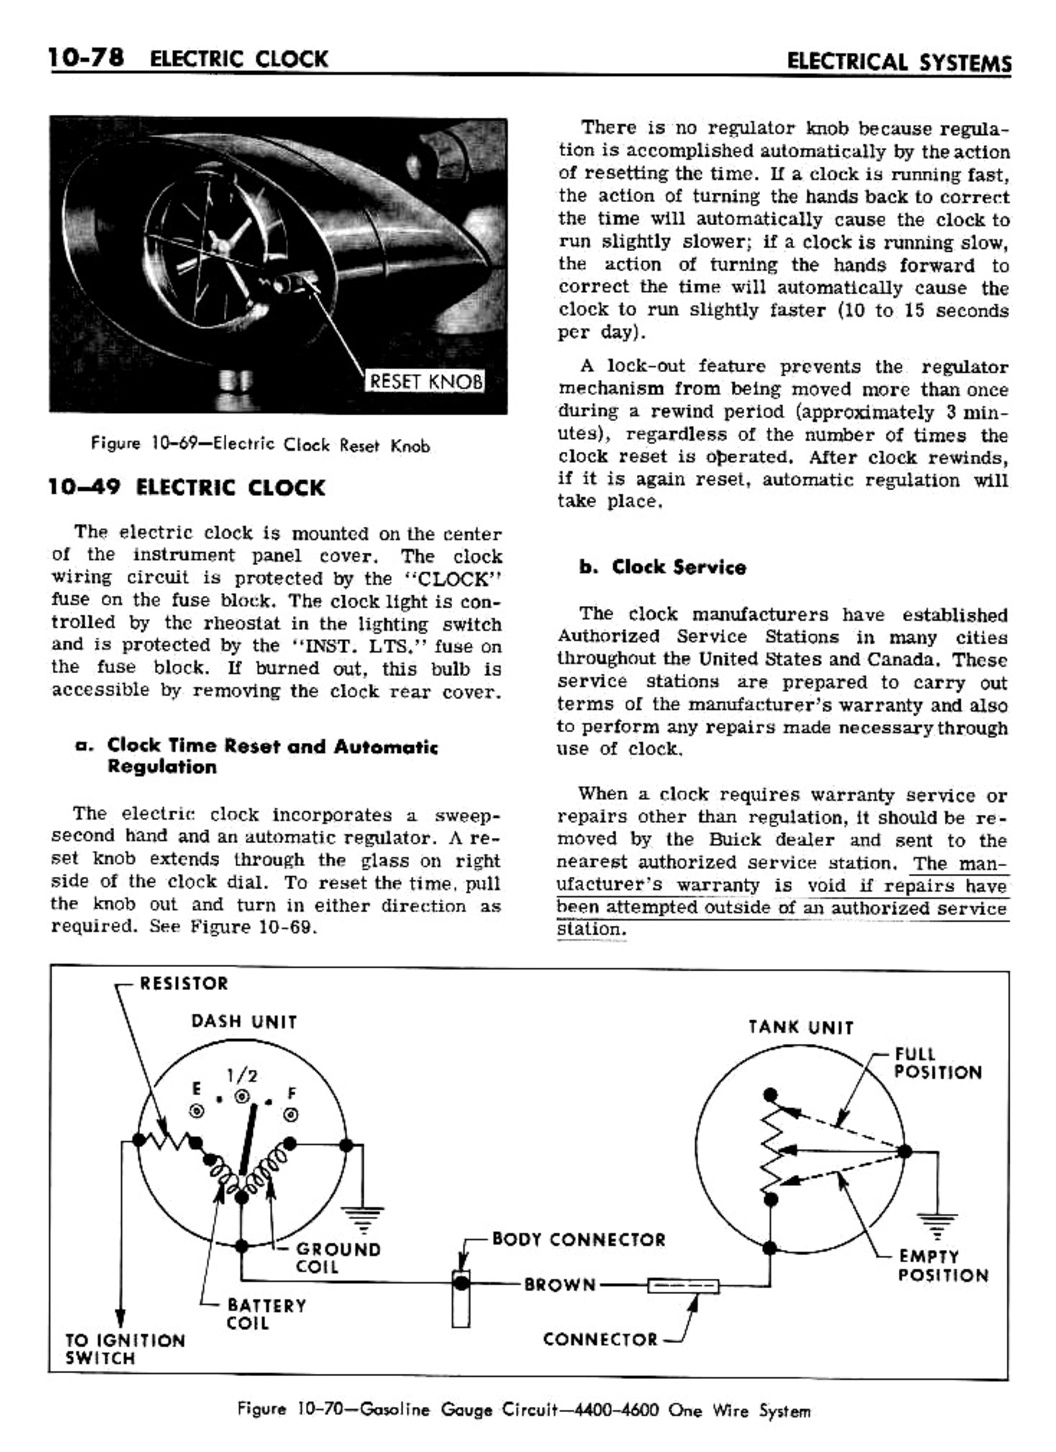 n_10 1961 Buick Shop Manual - Electrical Systems-078-078.jpg